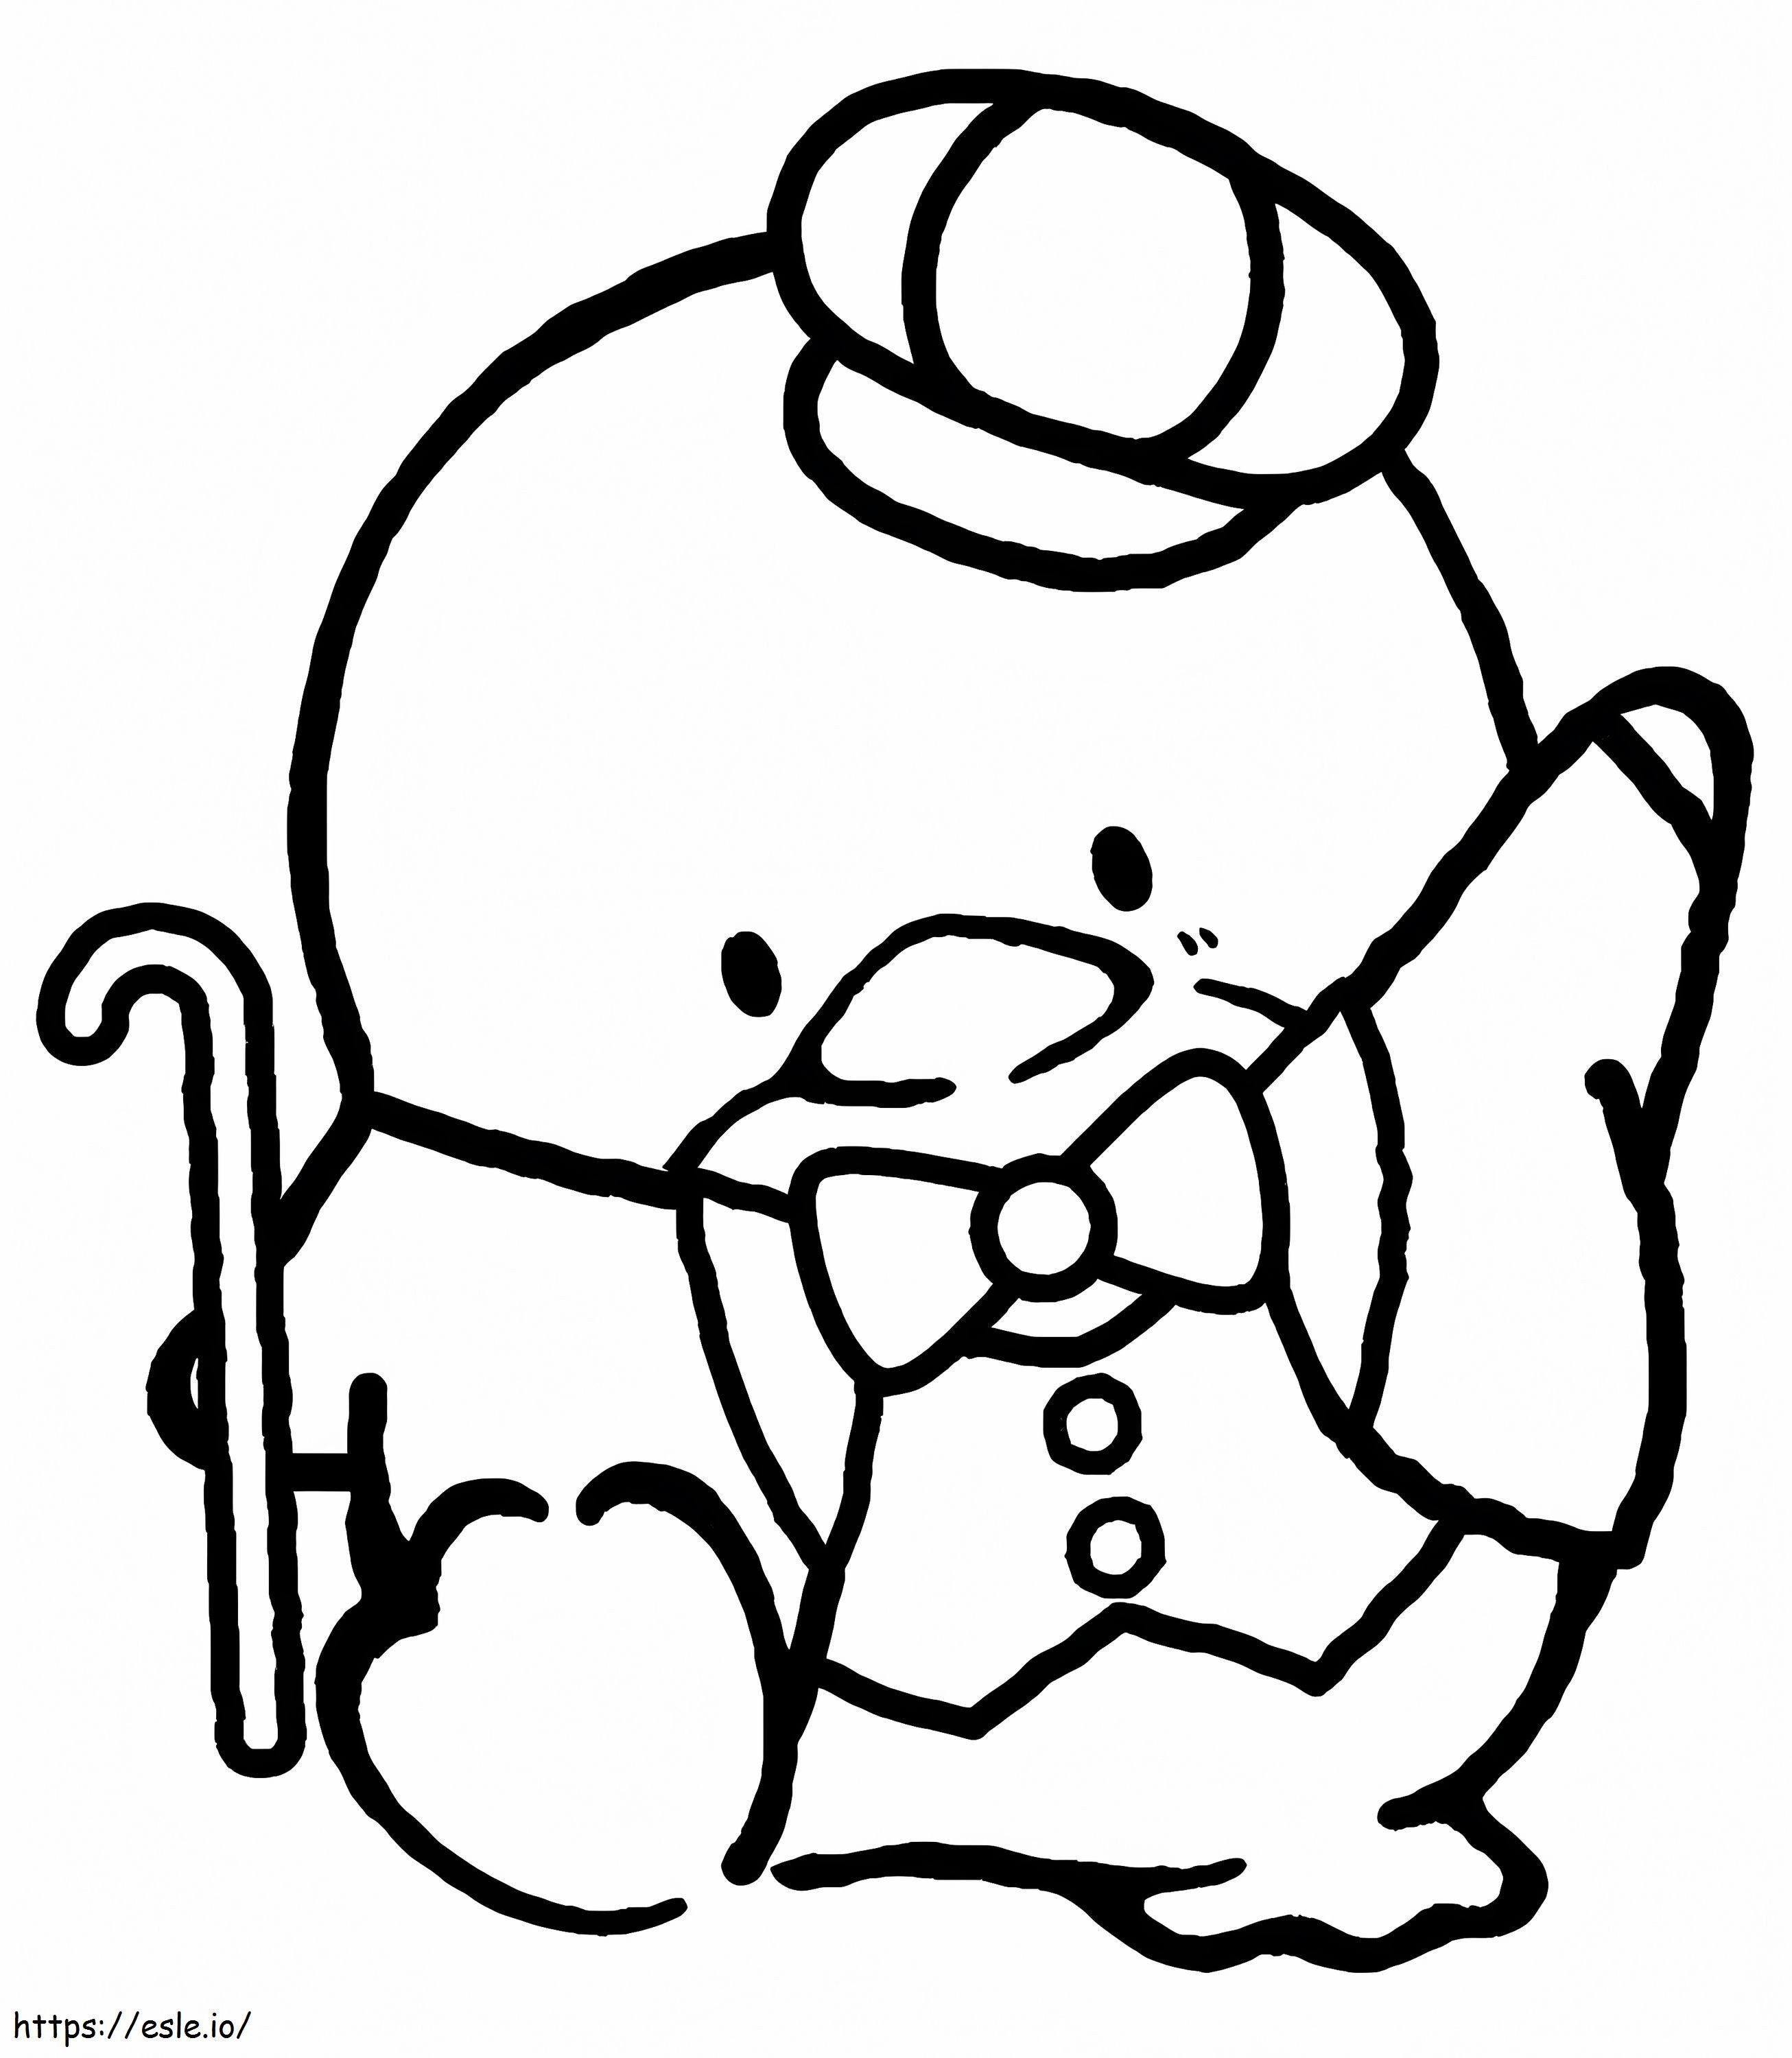 Tuxedo Sam To Print coloring page